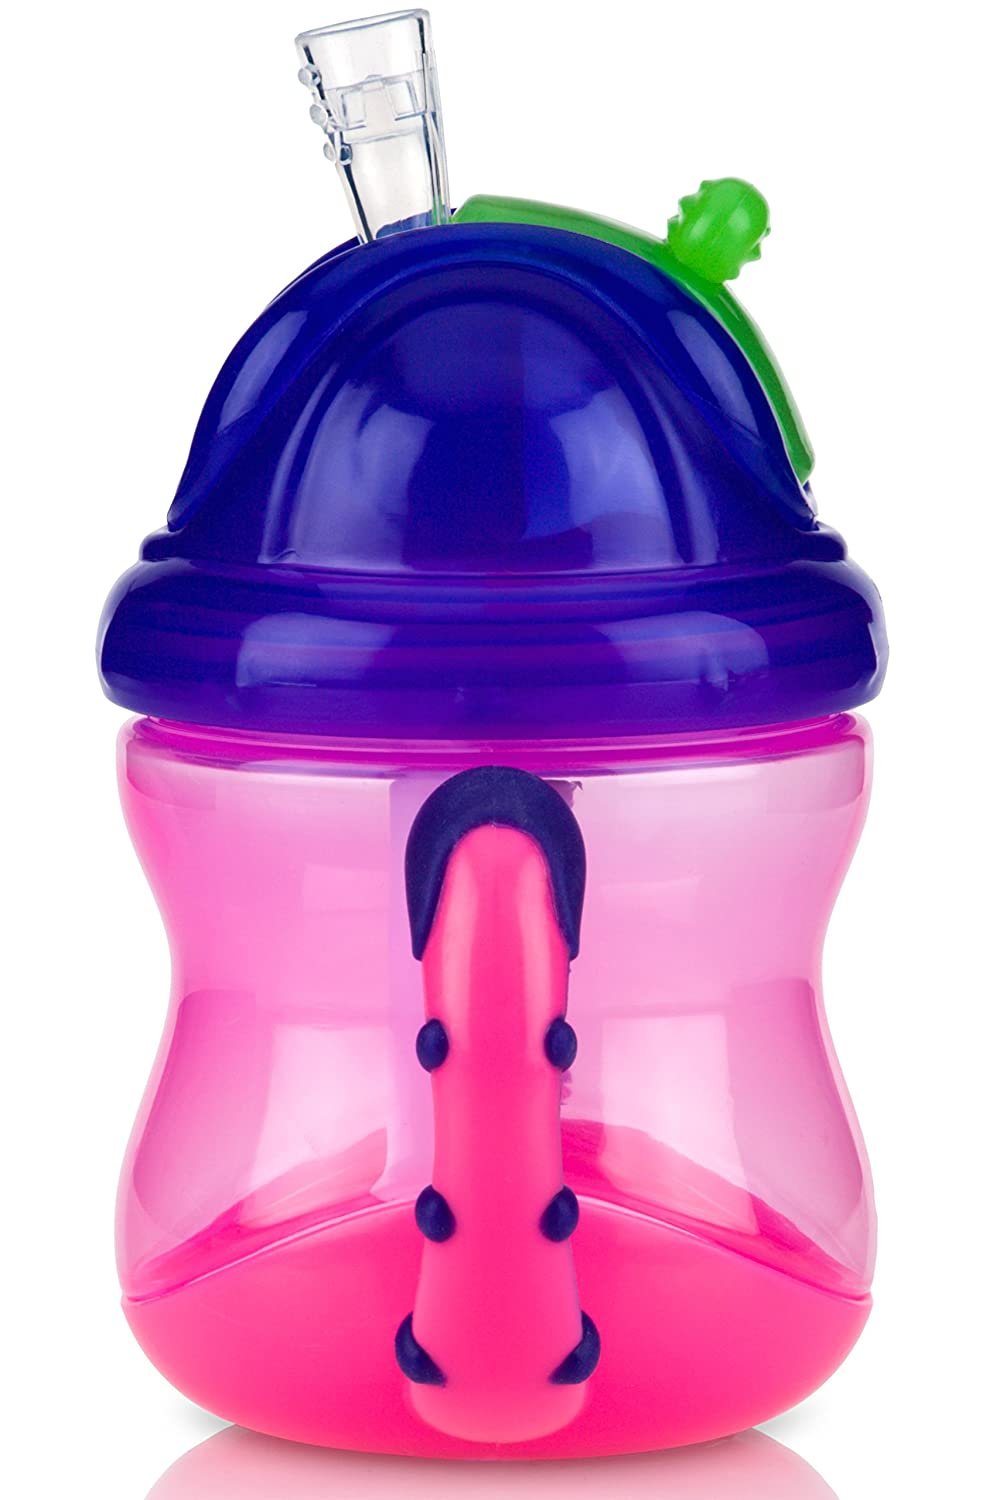 Nuby Clear Replacement Straw Compatible with Nuby's Flip n' Sip Cups